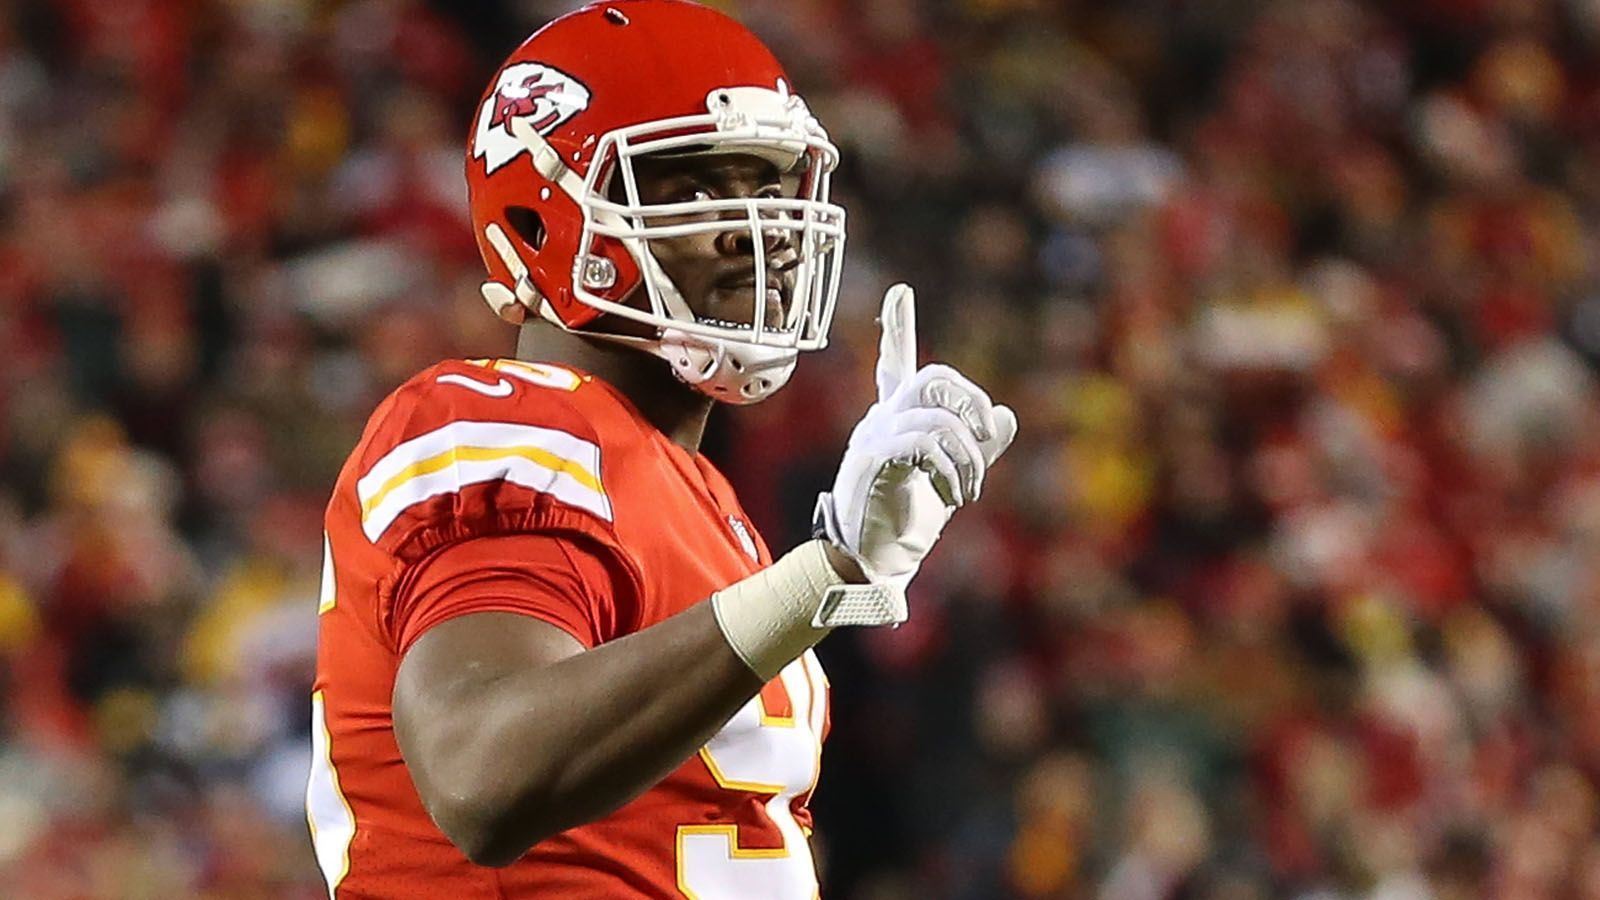 
                <strong>5. Platz: Chris Jones</strong><br>
                &#x2022; Team: Kansas City Chiefs<br>&#x2022; Position: Defensive Tackle<br>&#x2022; <strong>Overall Rating: 91</strong><br>&#x2022; Key Stats: Speed: 69 - Strength: 92 - Awareness: 95<br>
              